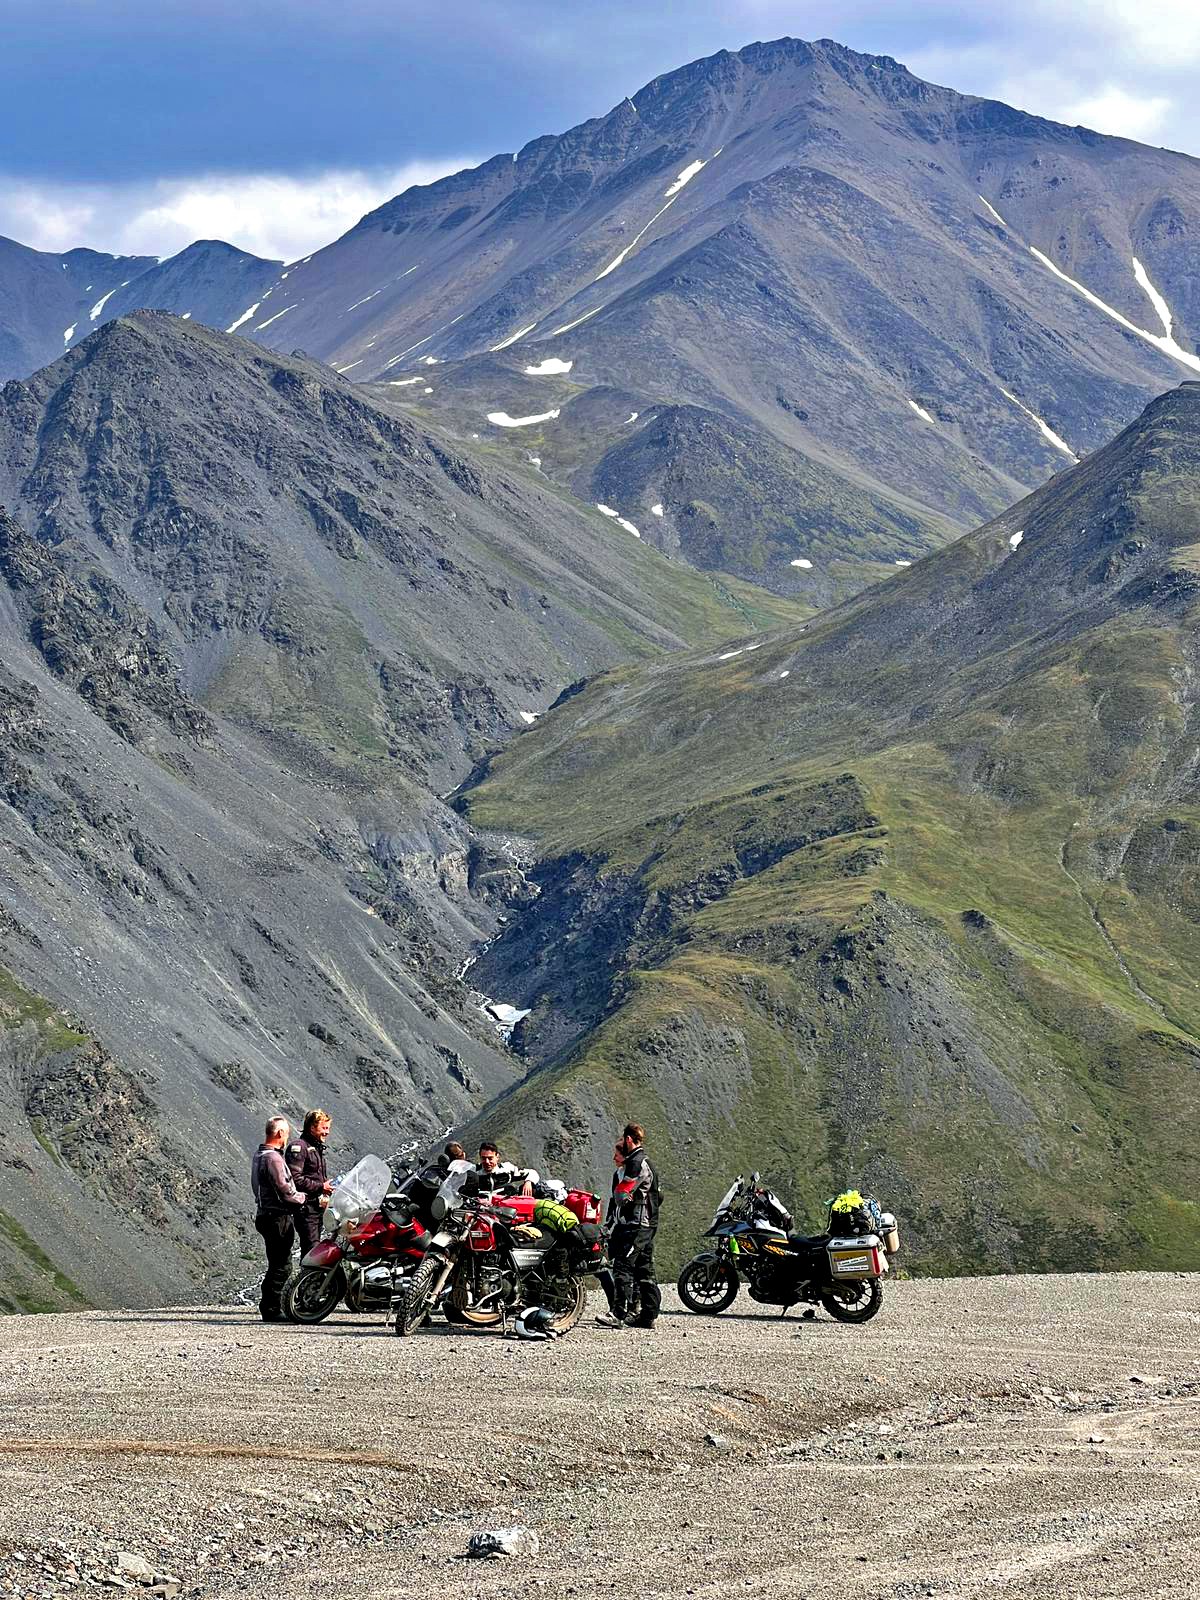  New friends gather on Atigun Pass to take in the majesty and celebrate their accomplishment. 